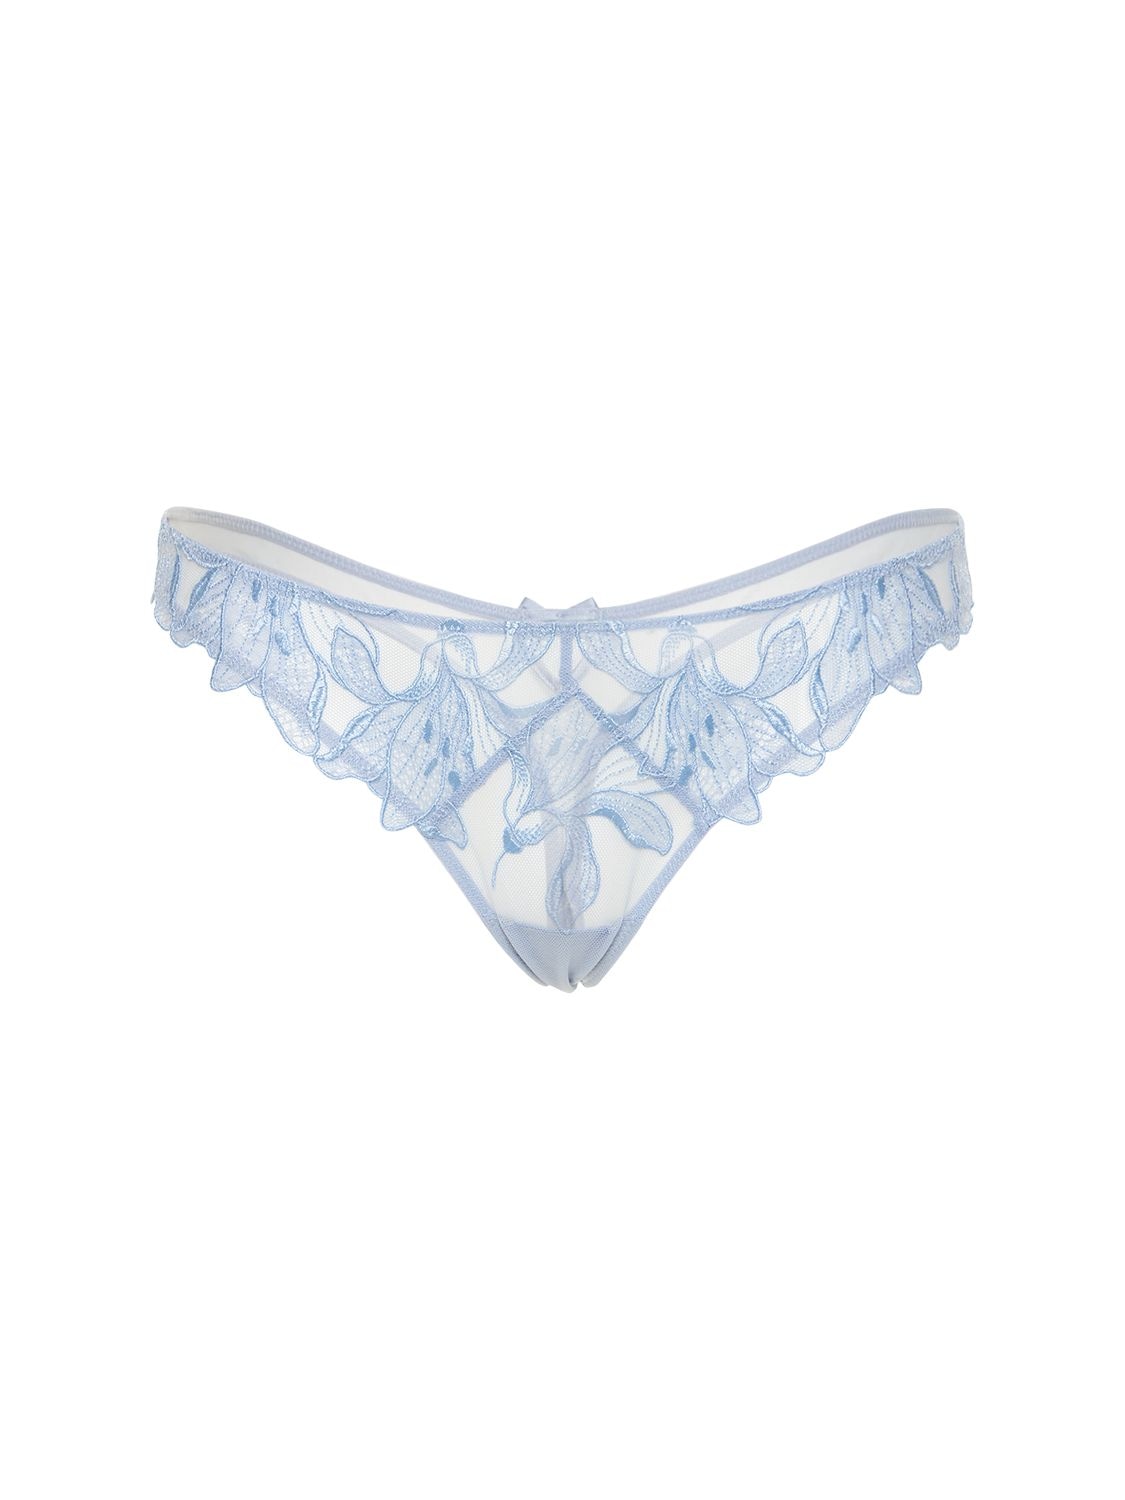 FLEUR DU MAL LILY EMBROIDERED LACE HIPSTER THONG